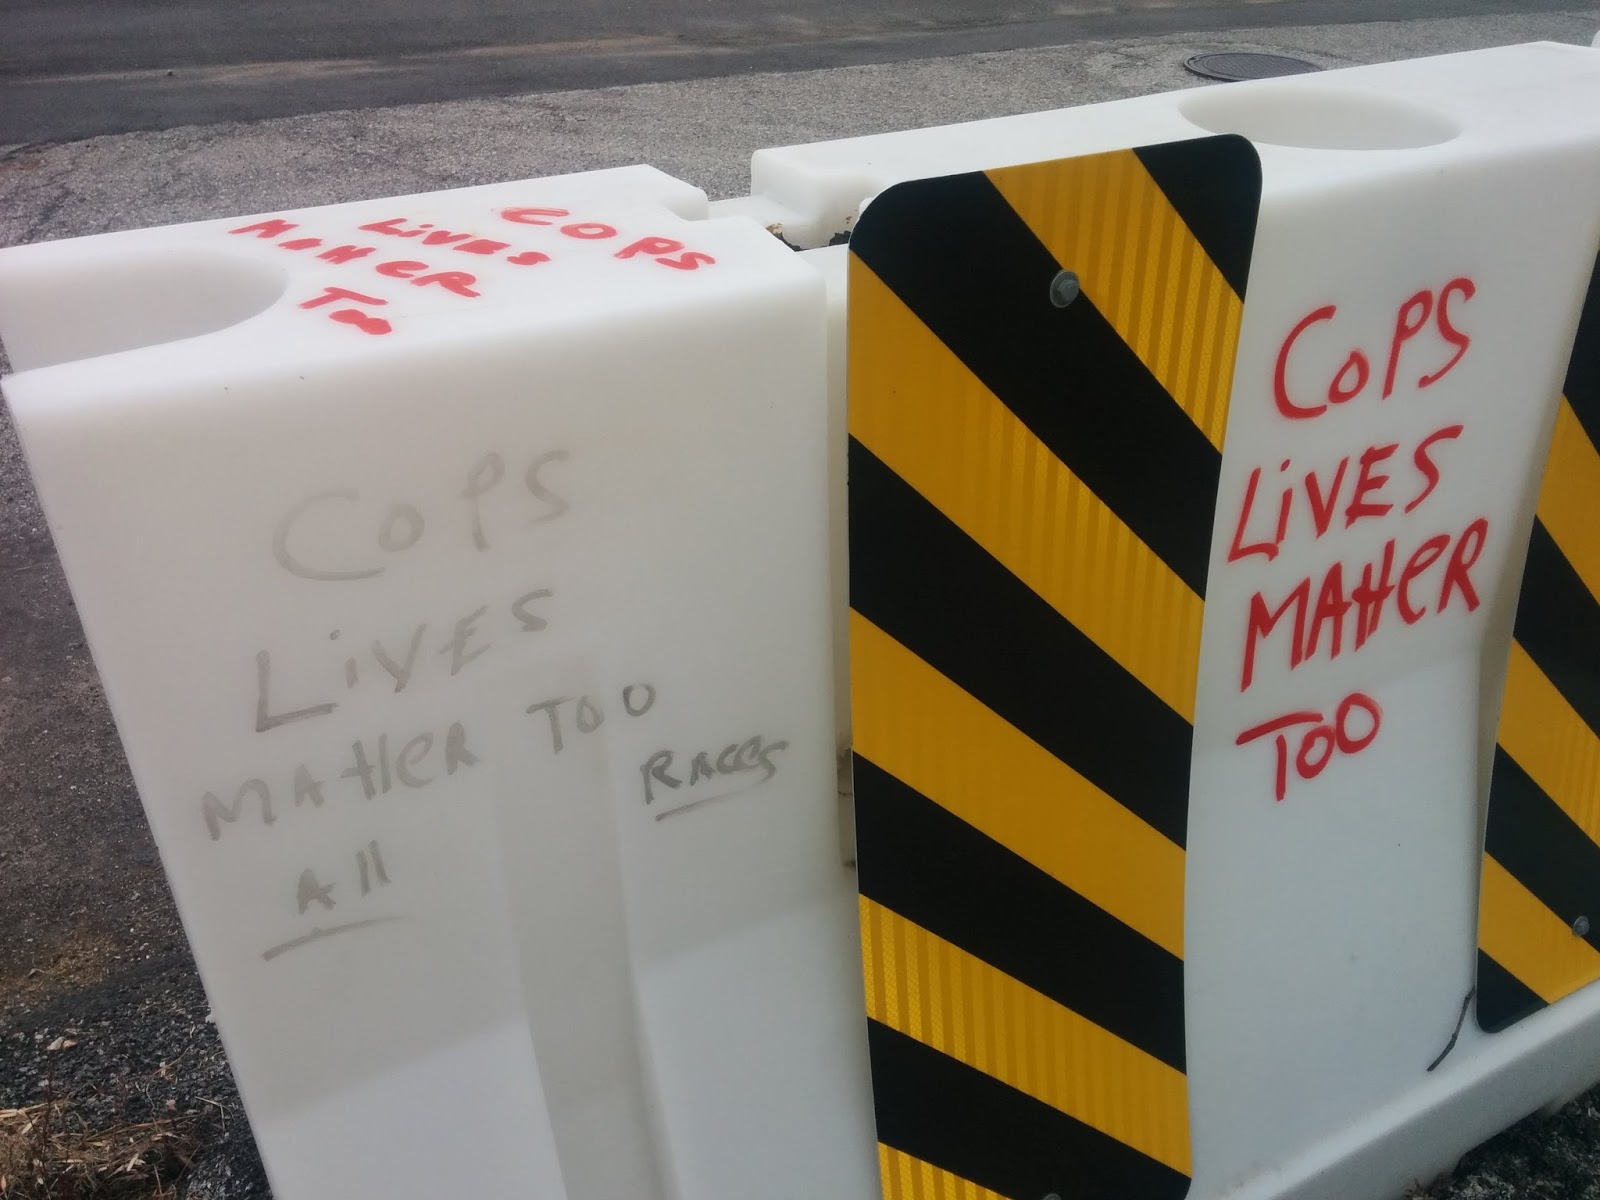 Photo of graffiti on a white road block. The letters are bold, scrawled in black and red permanent marker. The black letters, somewhat faded, read, 'Cops lives matter too' and underneath that, in underlined black text, 'all races.' On the other side of the road block and on top of it, this time written in red, the statement 'Cops lives matter' appears again.